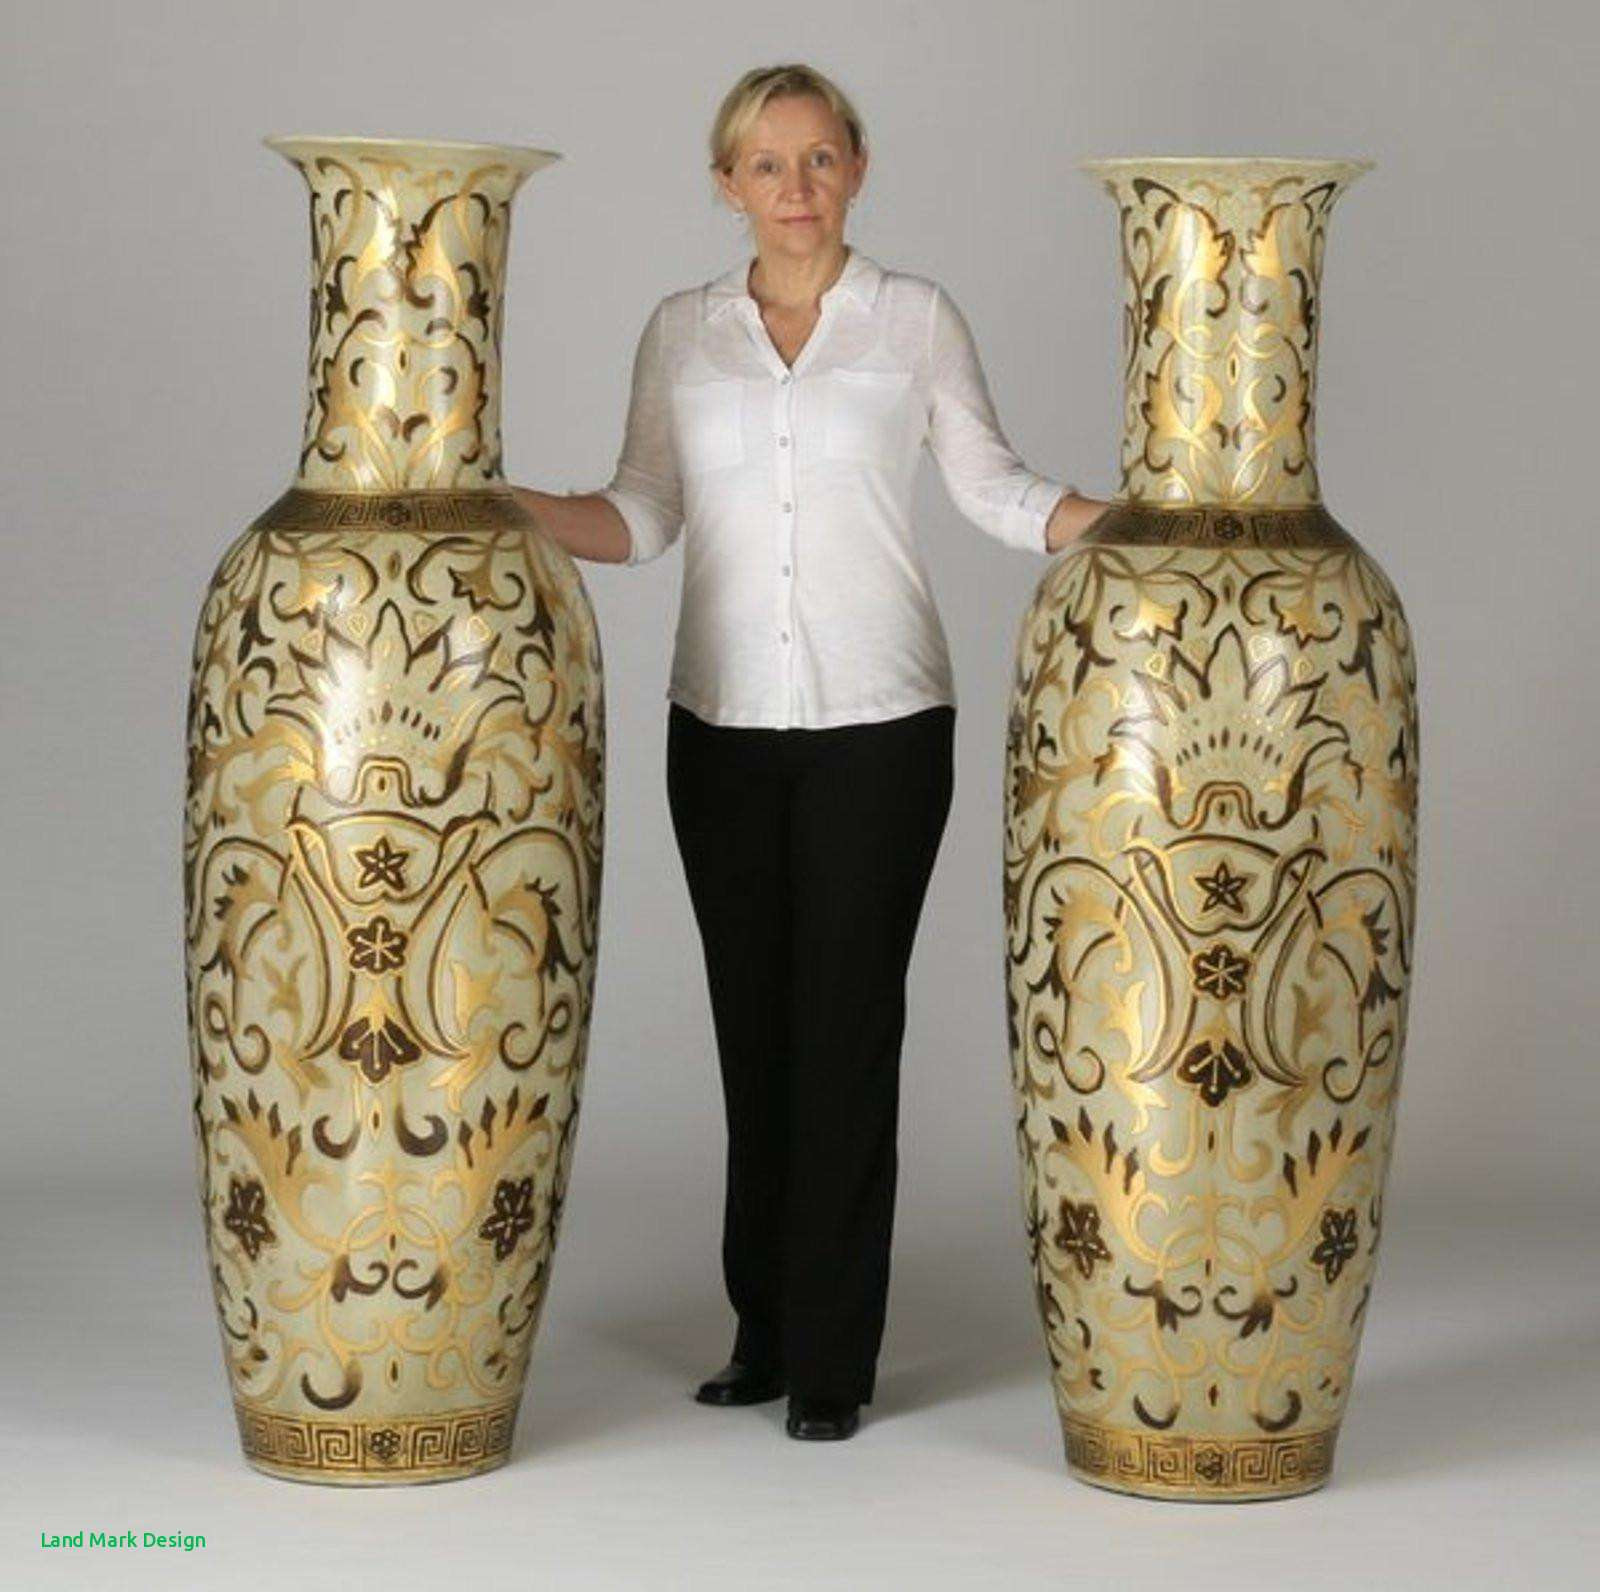 20 Fabulous Very Large Floor Vases 2024 free download very large floor vases of oversized floor vases home design with regard to full size of living room white floor vase luxury h vases oversized floor i 0d large